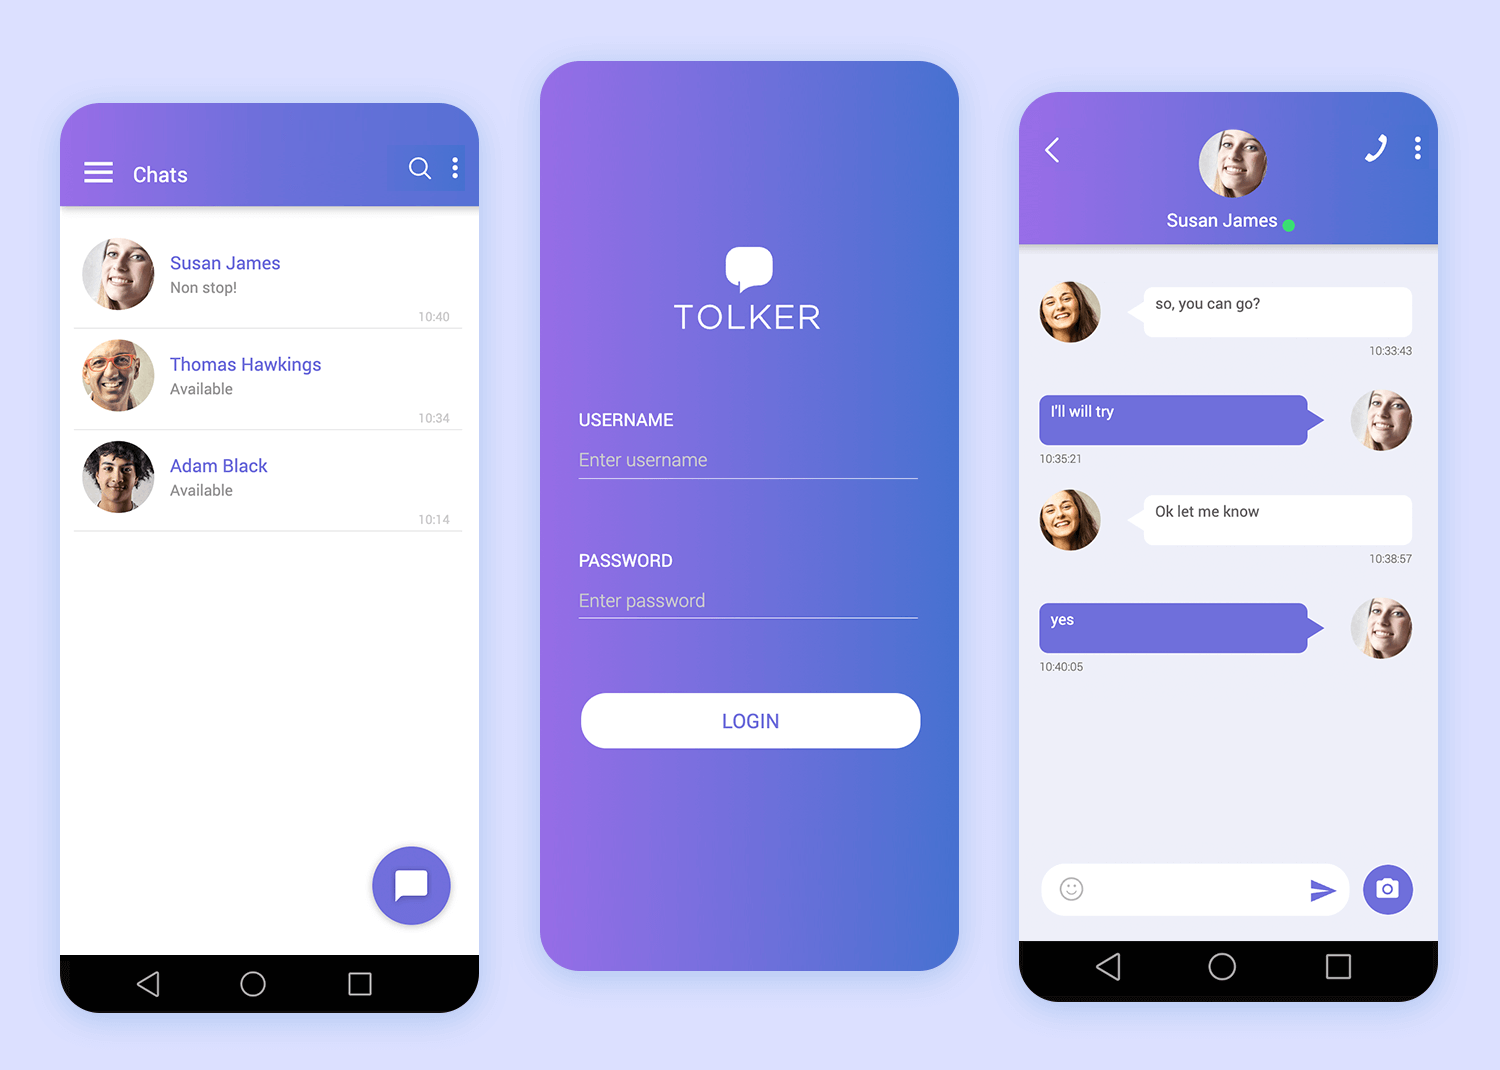 Mockup of a messaging app featuring login and chat screens with user avatars and a gradient background.